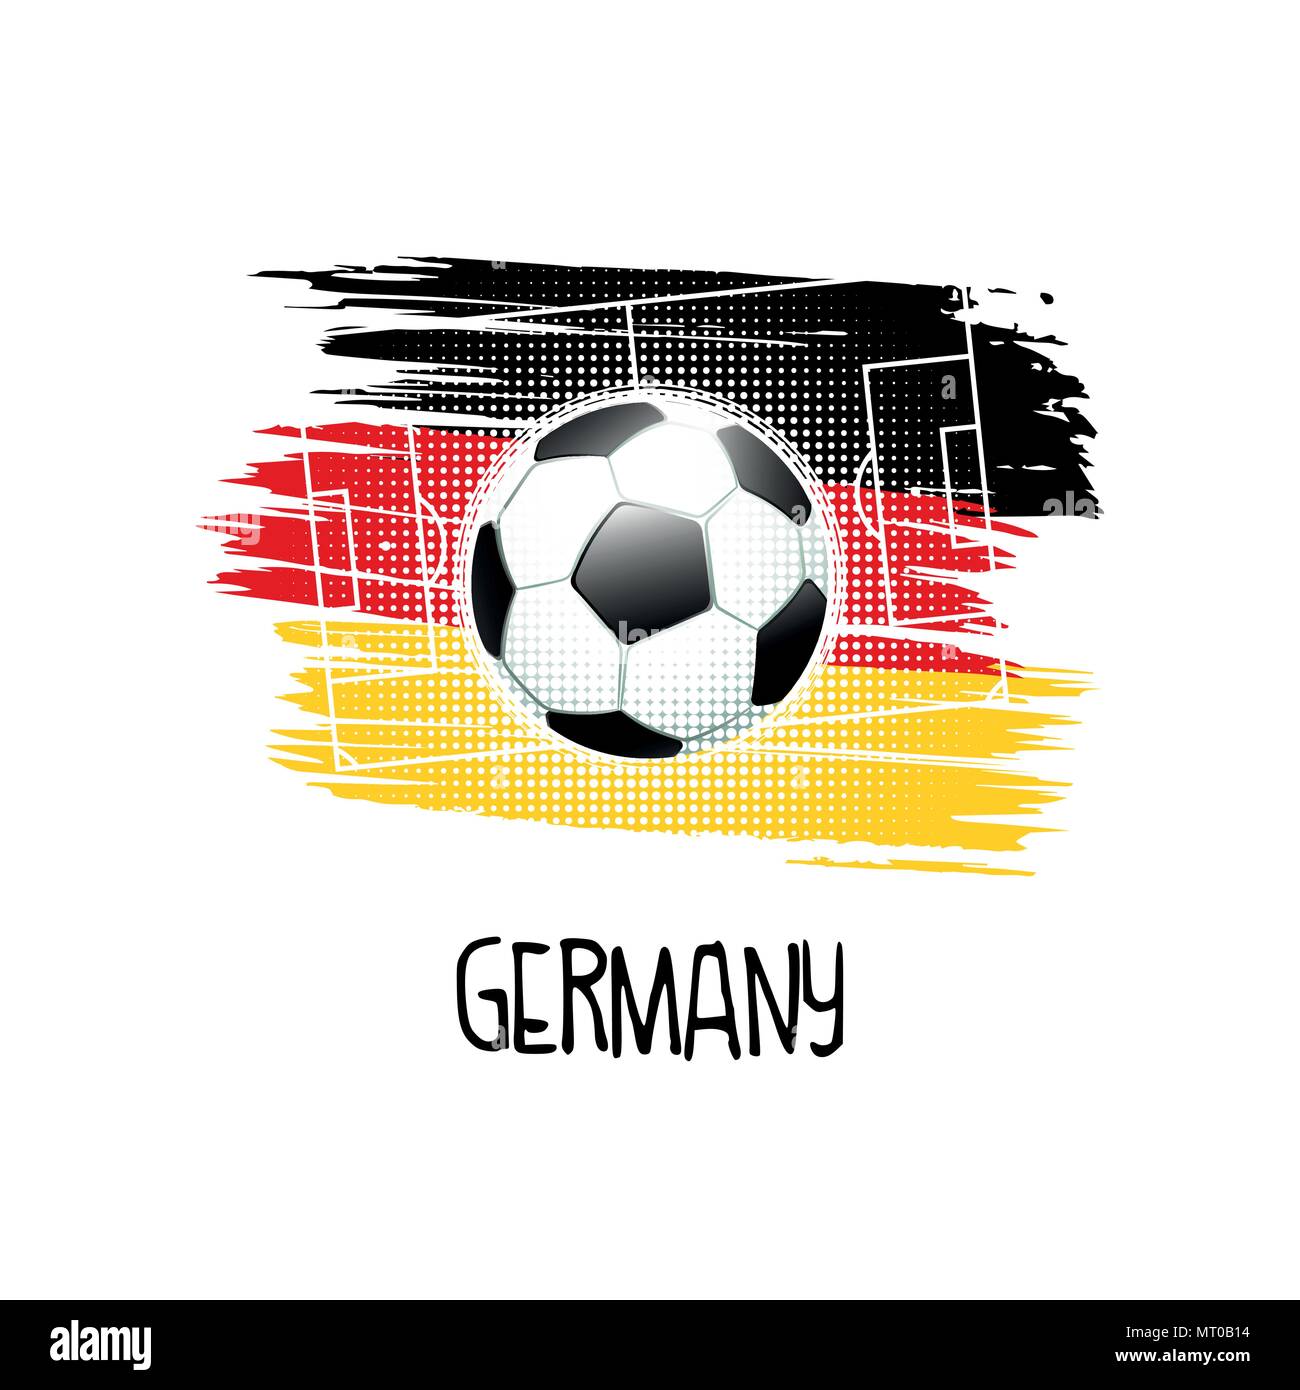 Hand written word 'Germany' with soccer ball, soccer field and abstract colors of the German flag. Vector illustration. Stock Vector